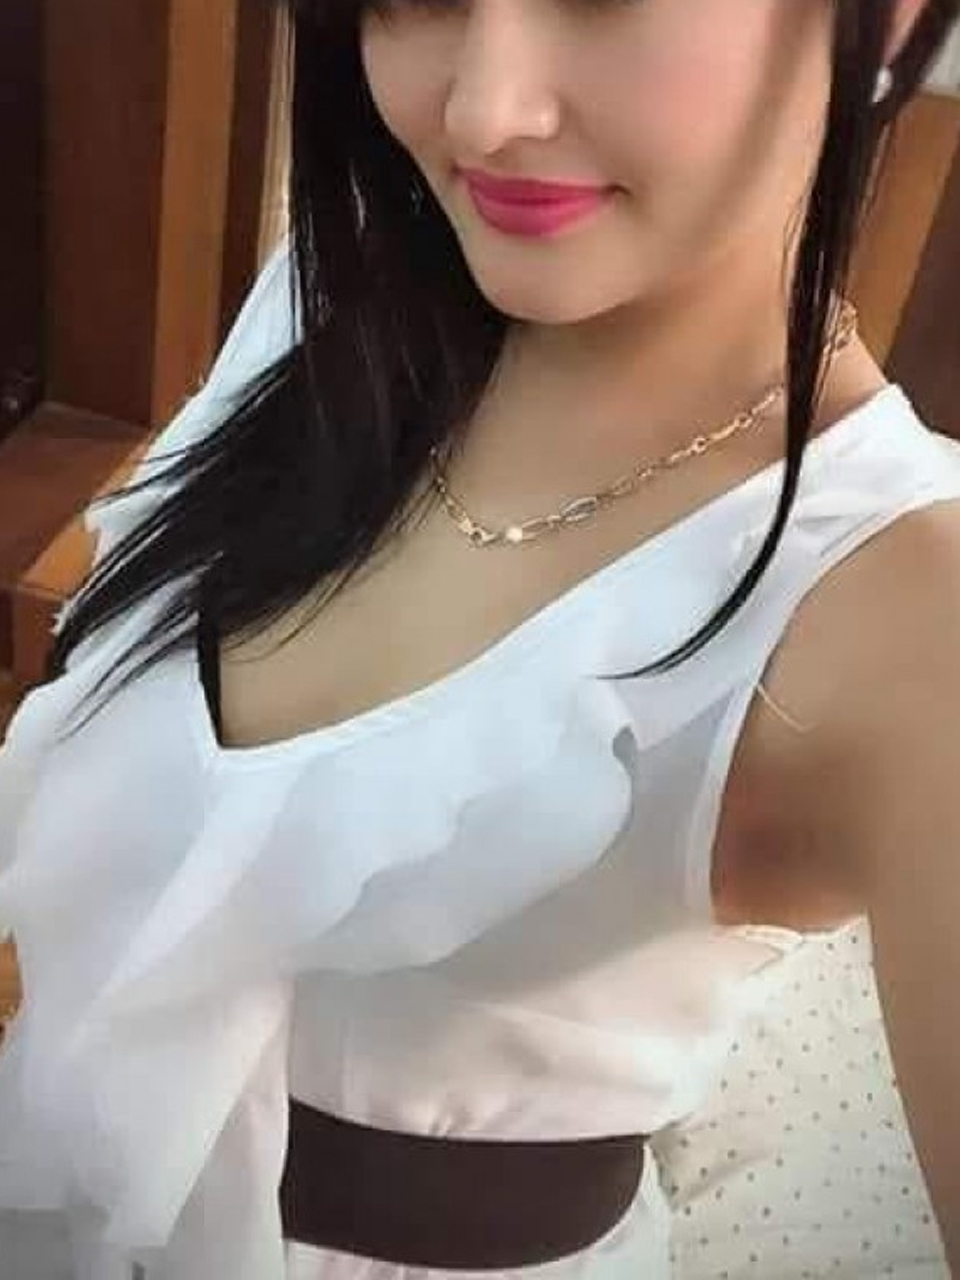 Call Girls Number in Noida